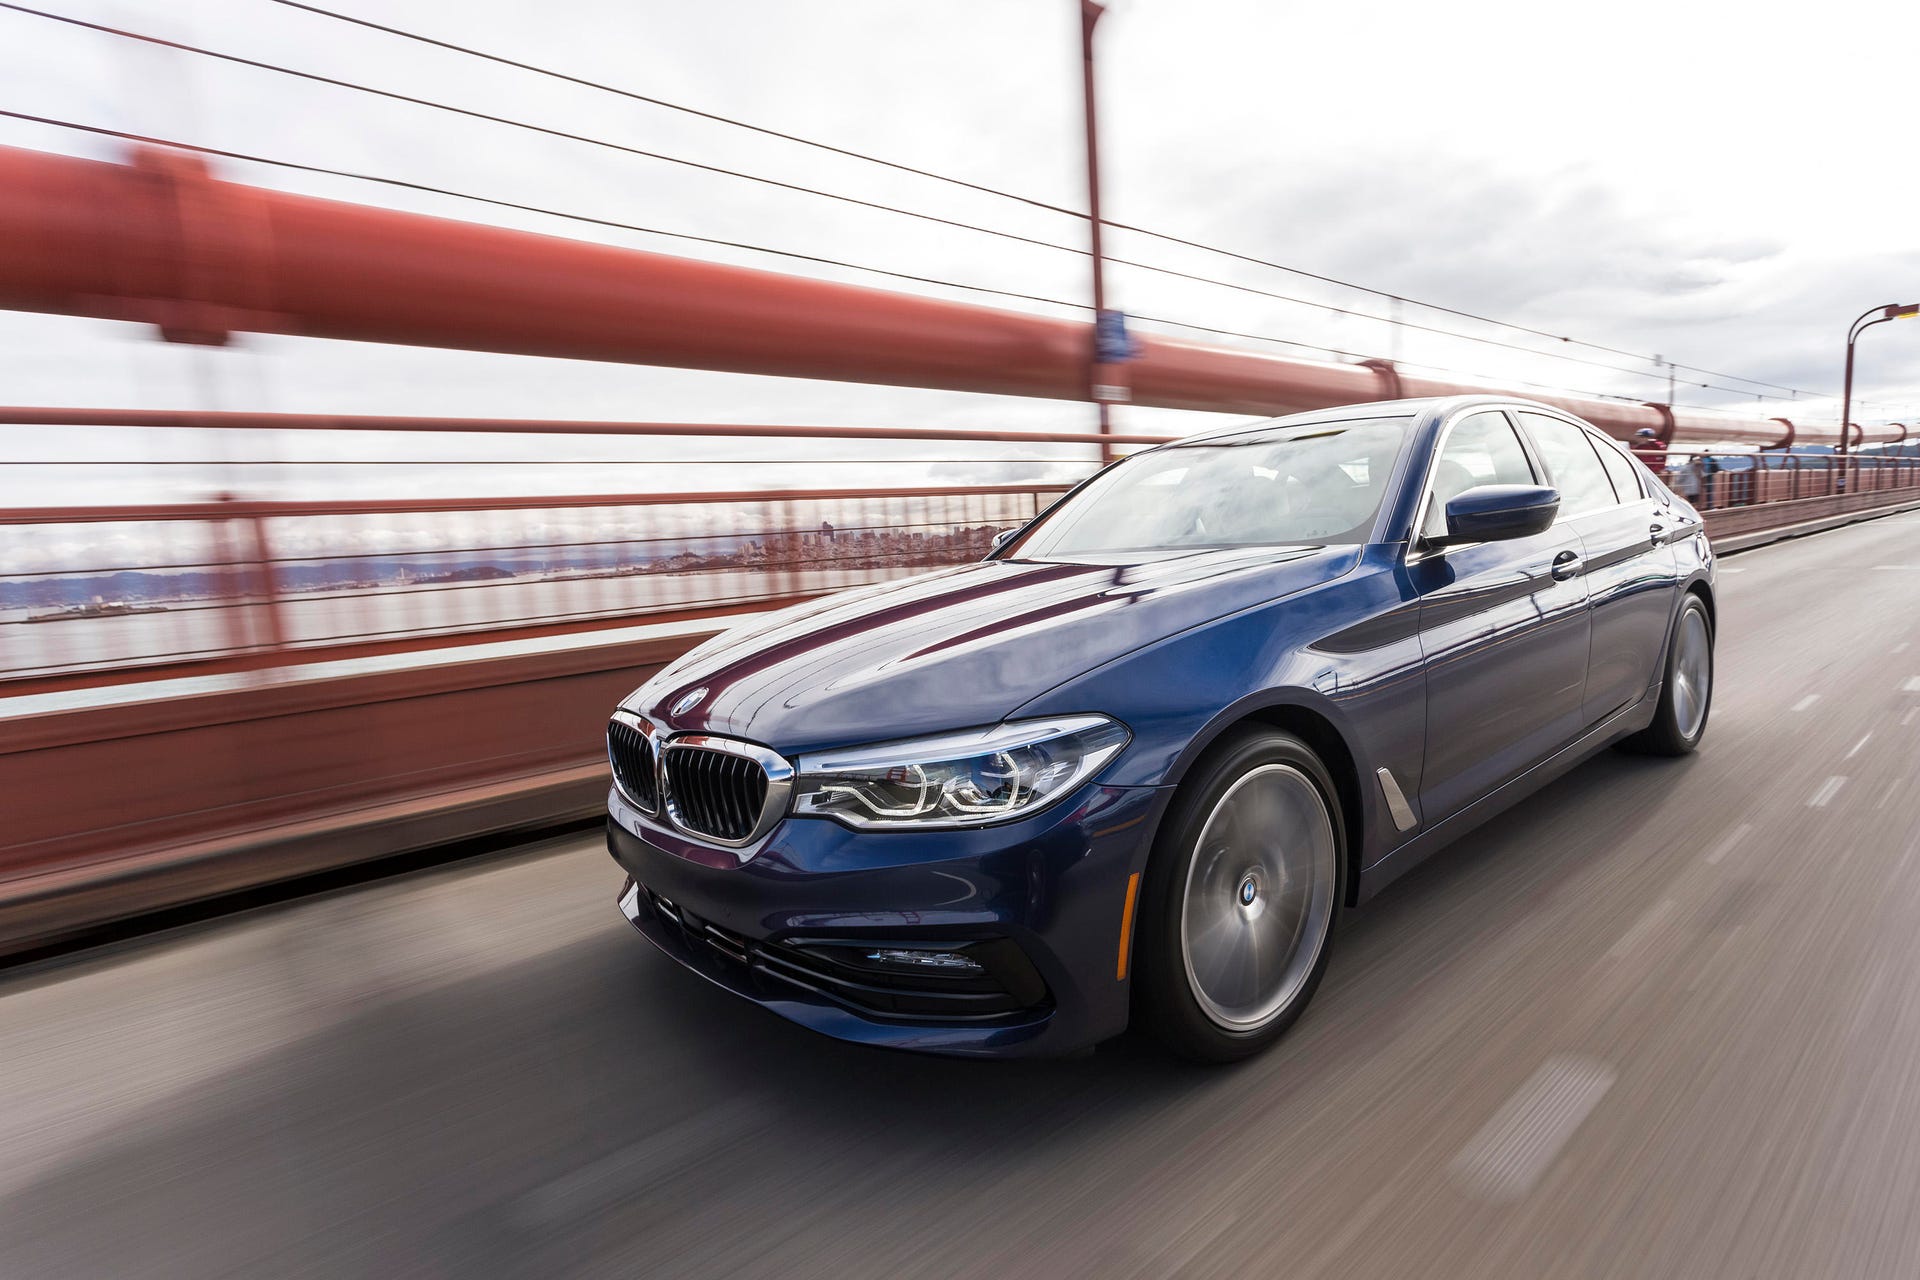 2019 BMW 5 Series: Model overview, pricing, tech and specs - CNET